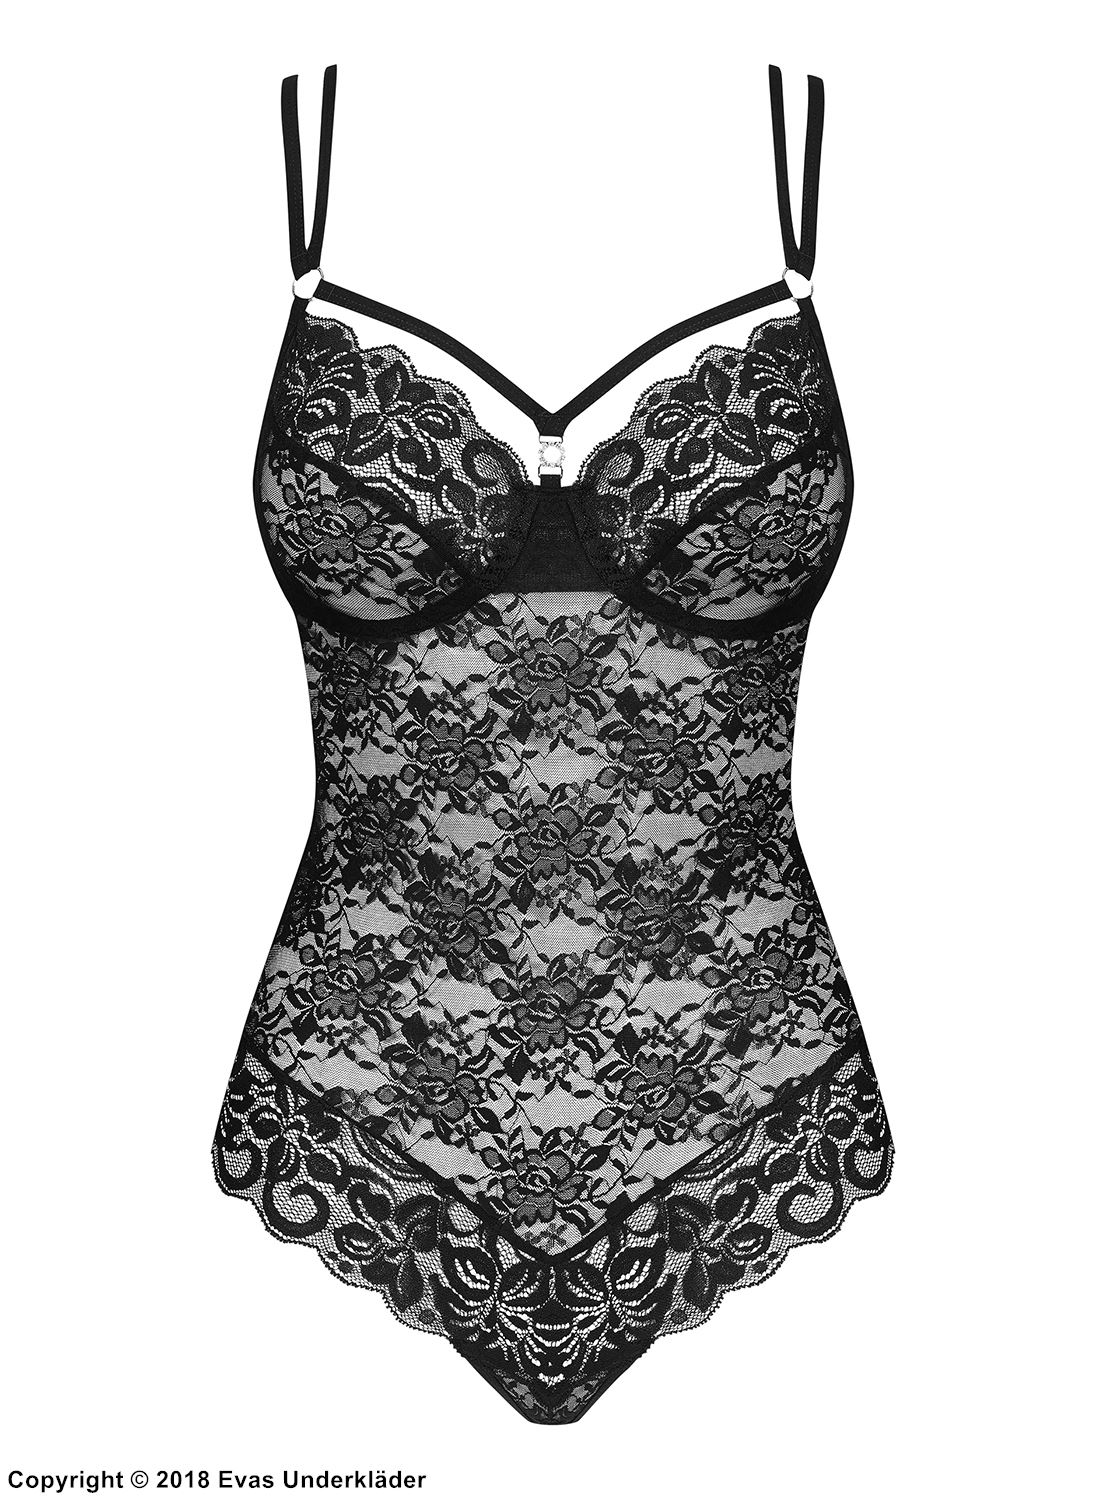 Teddy, lace, straps over bust, crossing straps